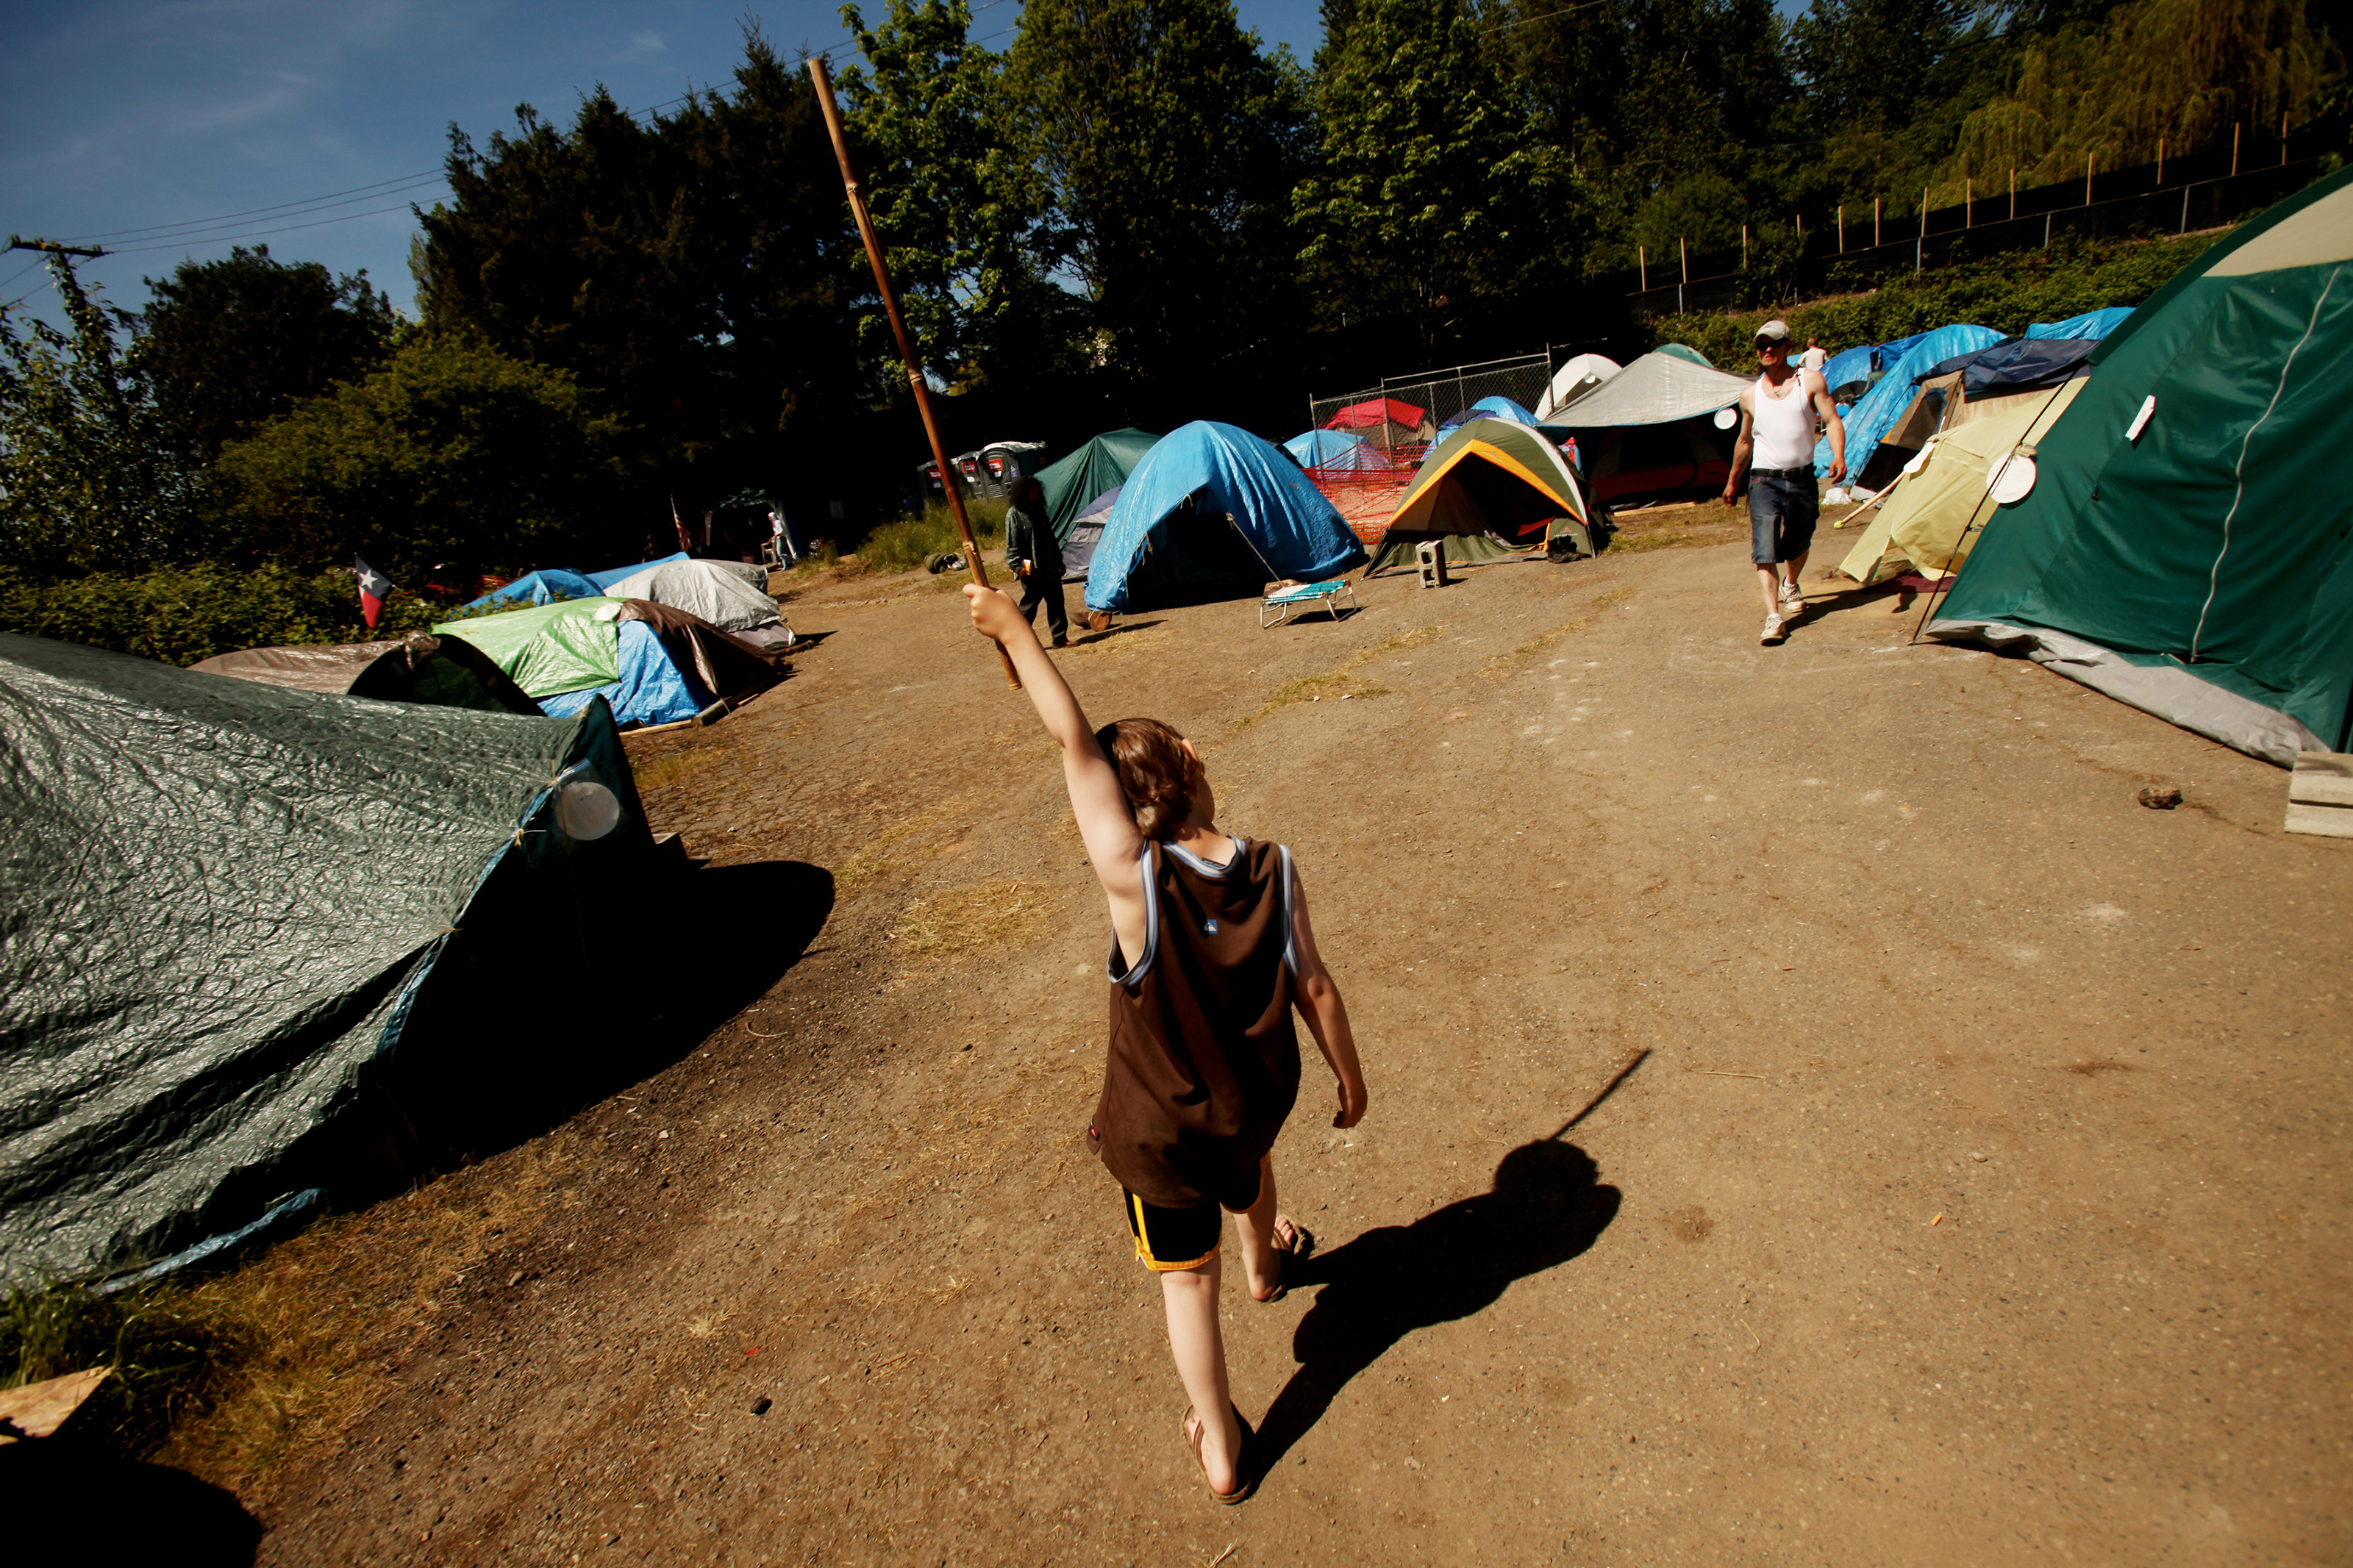 For "Jack's Journey," part of a Seattle Times series on homelessness, Erika Schultz profiled a homeless family, including 9-year-old Jack. Here, Jack marches with a bamboo stick through a tent city they lived in when they first moved from Chicago to Seattle